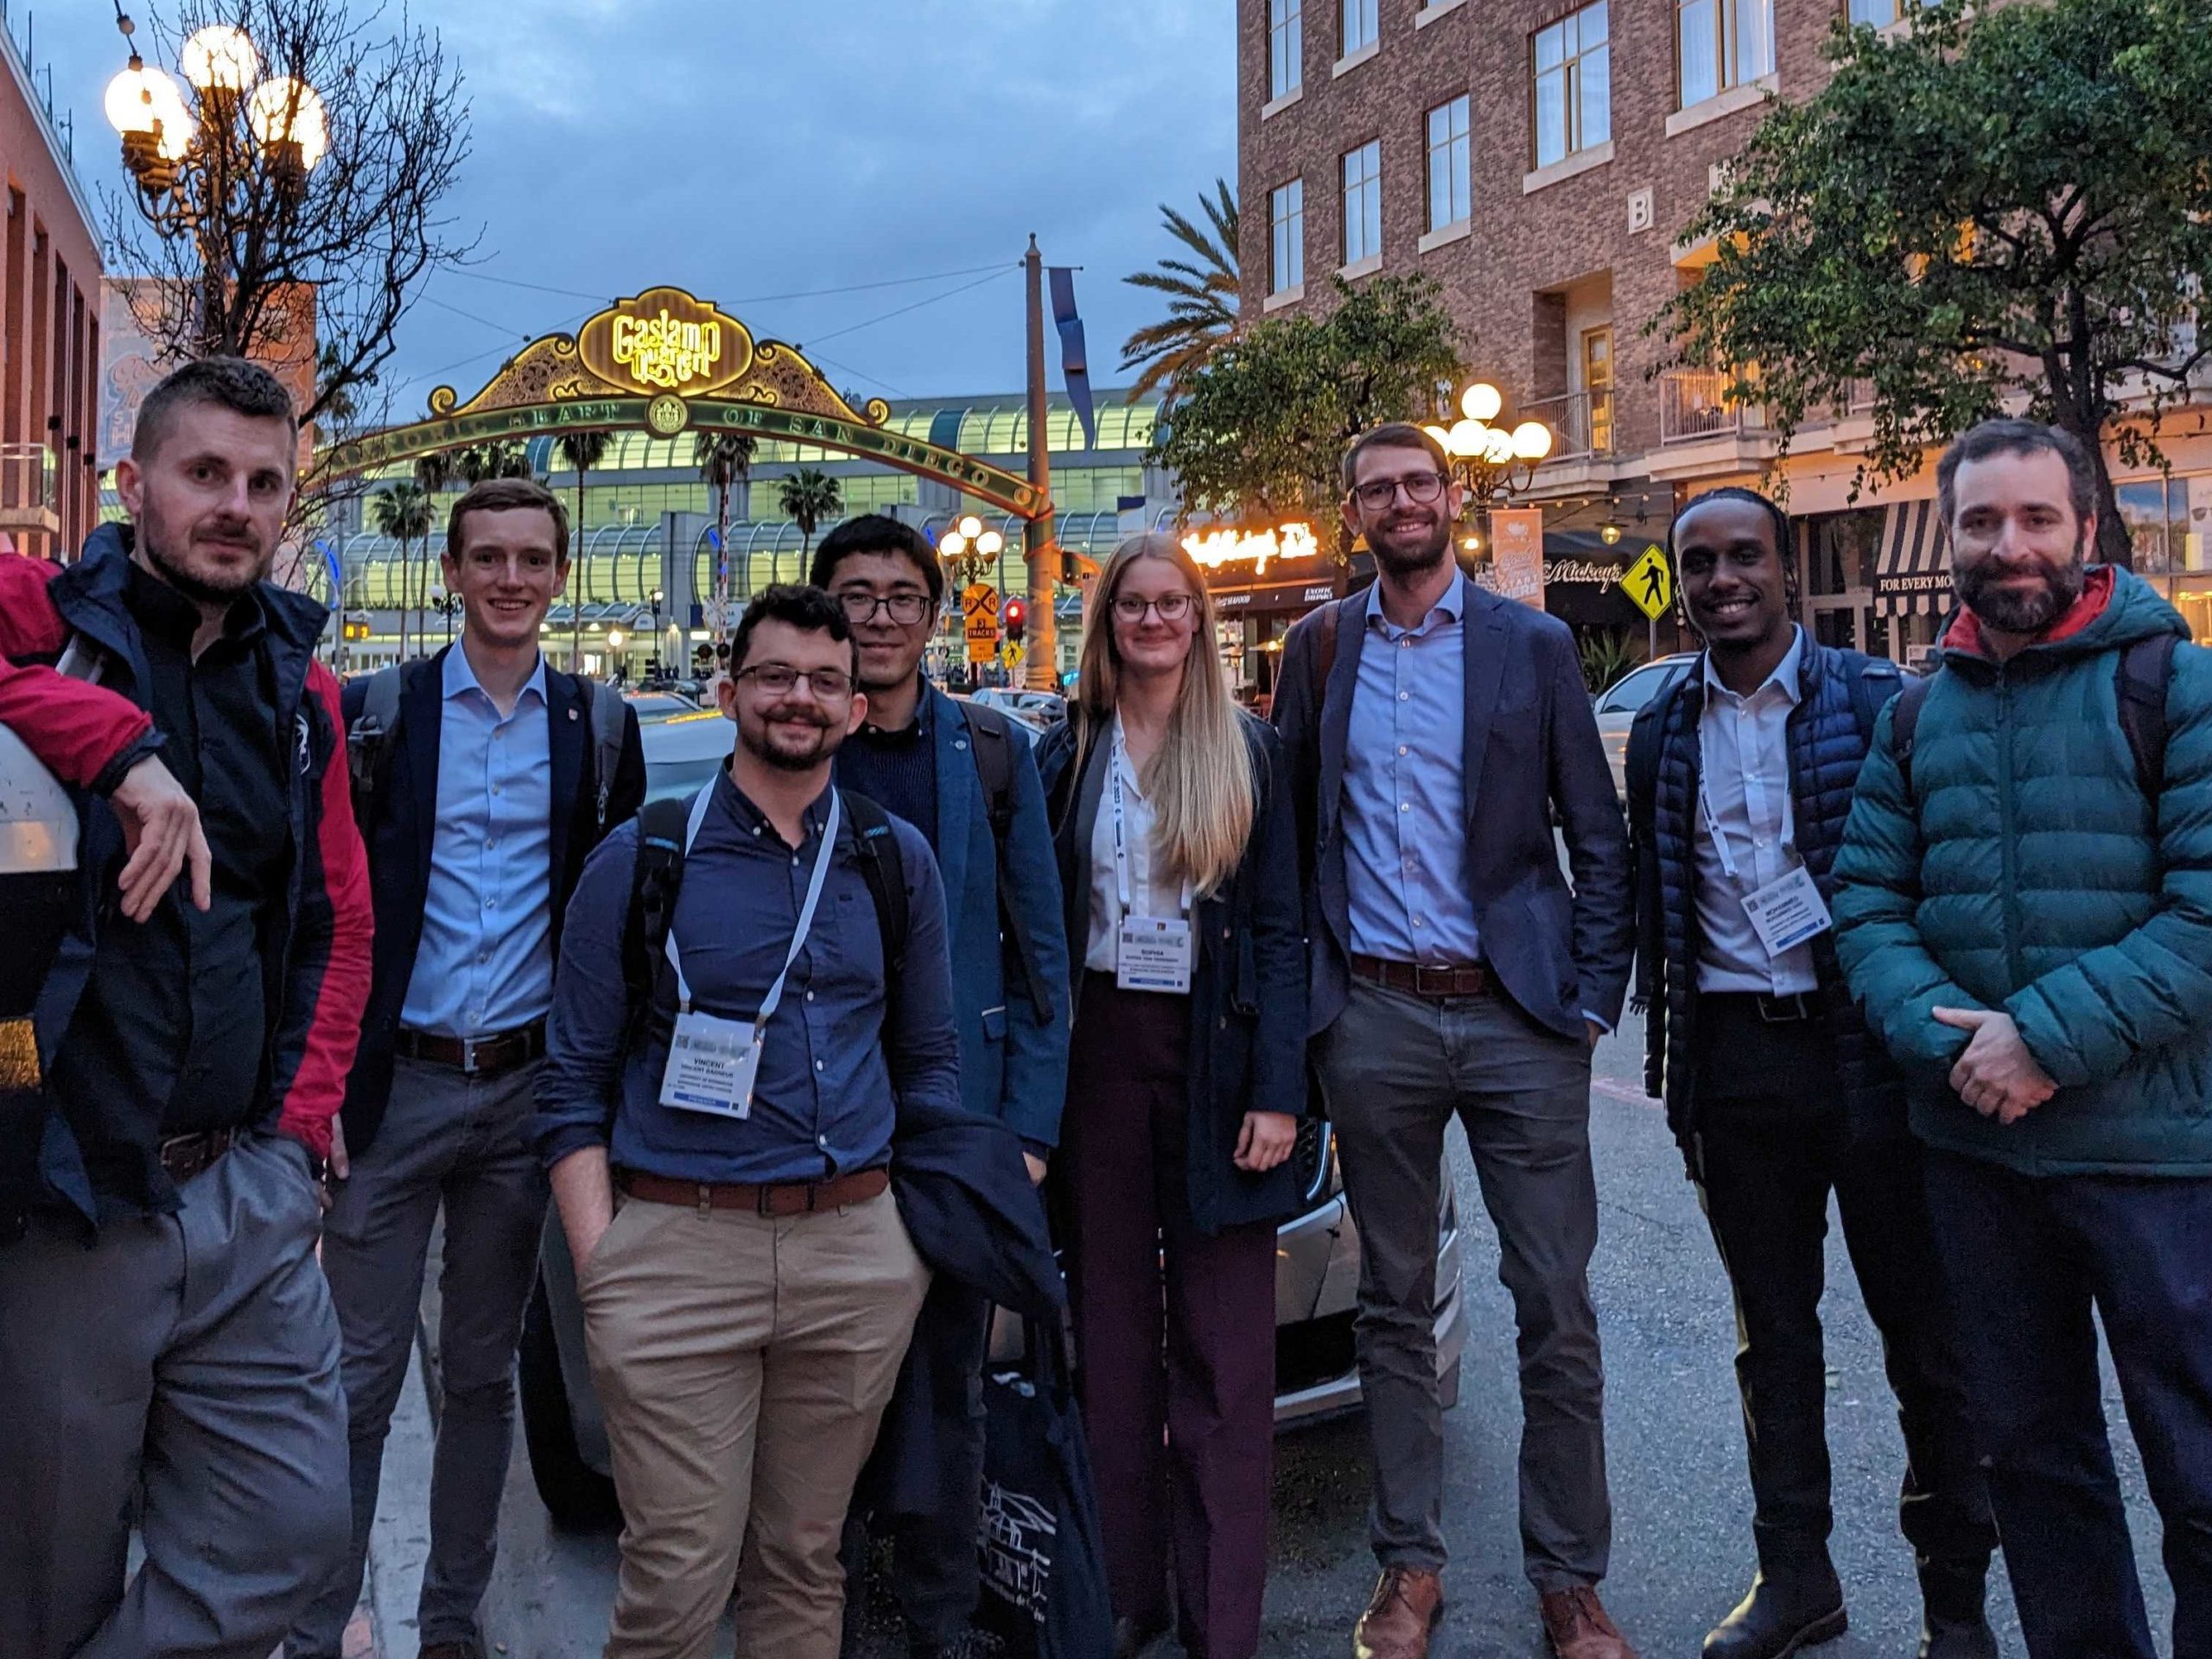 From left to right: Neal Parkes, Tom Blackburn, Vincent Gagneur, Kan Ma, Sophia von Tiedemann, Sandy Knowles, Mohammed Said, Pedro Ferreiros standing in front of Gaslamp Quarter Historic District arch. 